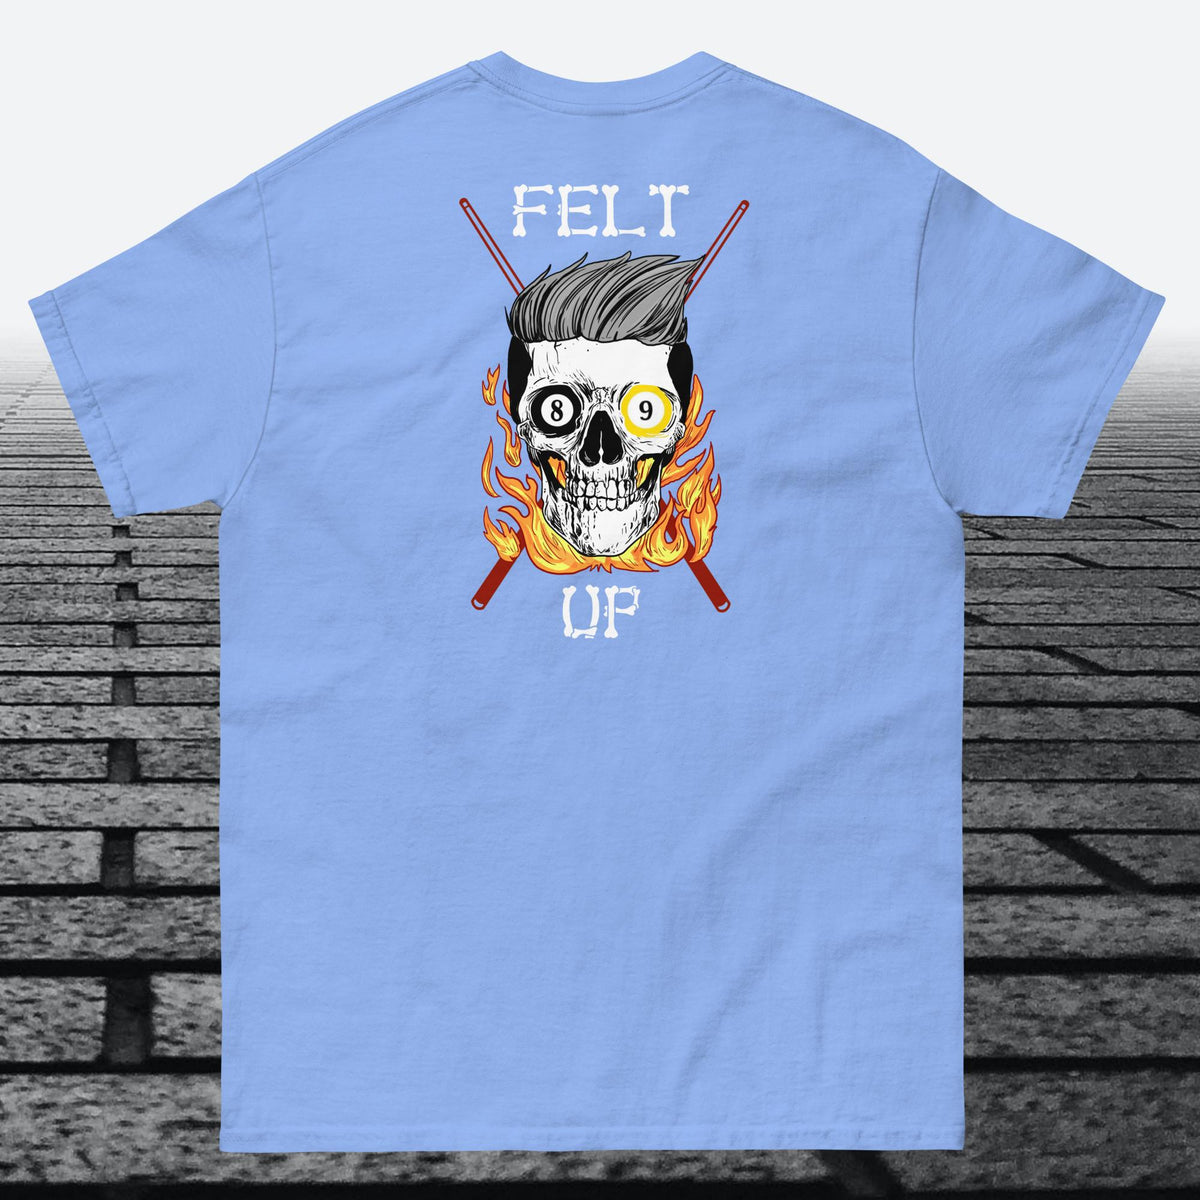 Felt Up, with logo on the front, Cotton t-shirt